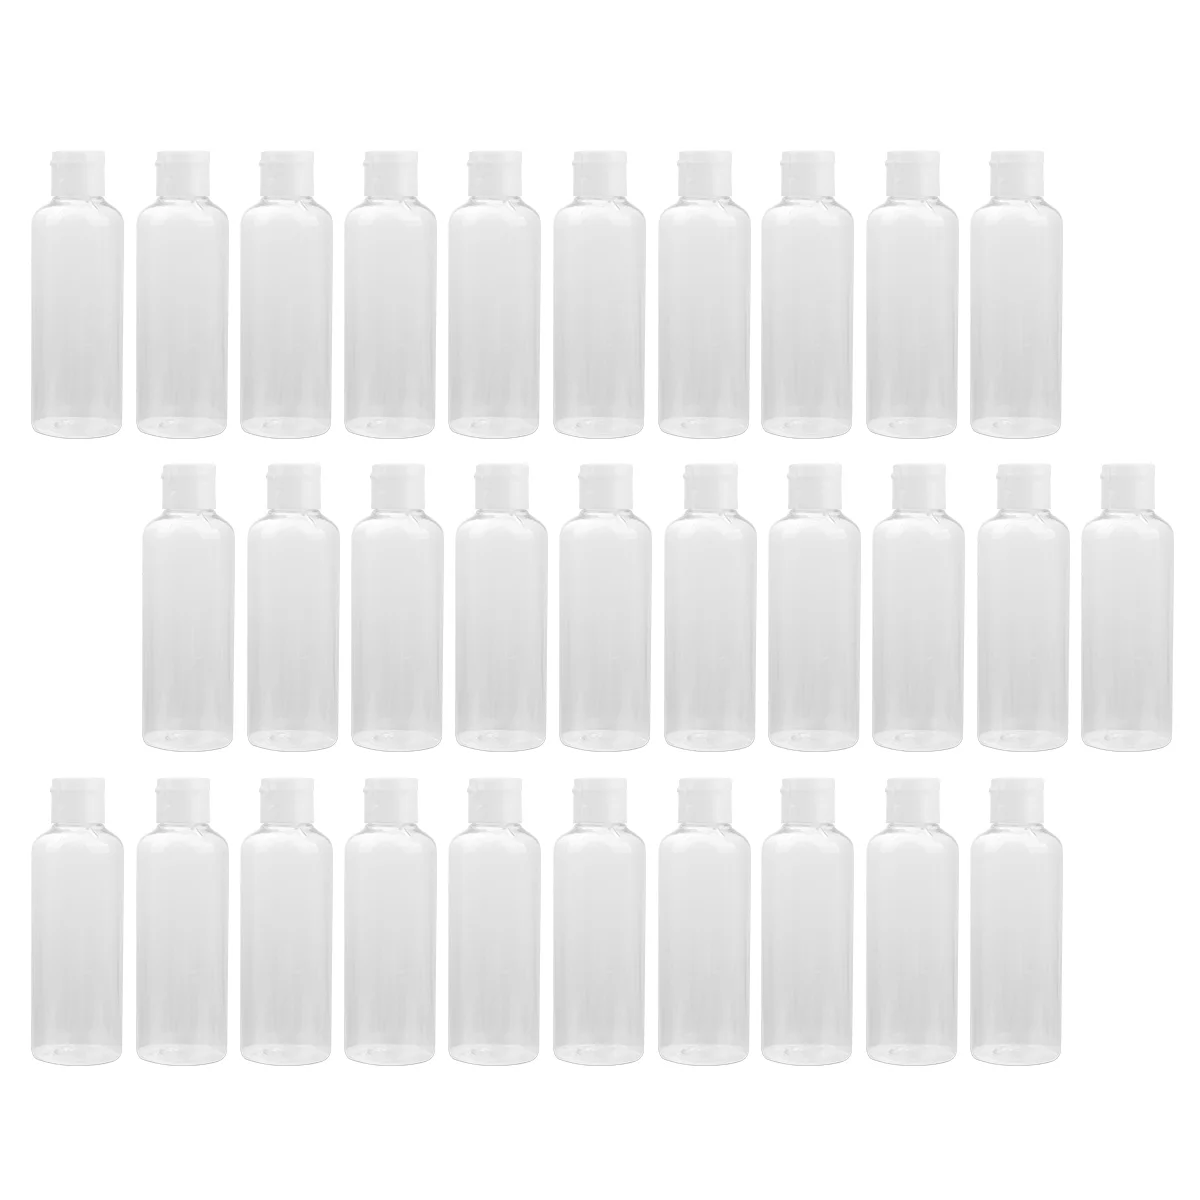 

30Pcs 100ml Empty Lotion Bottles Refillable Travel Emulsion Subpackaging Bottle Cosmetics Container for Shampoo, Lotions, Body